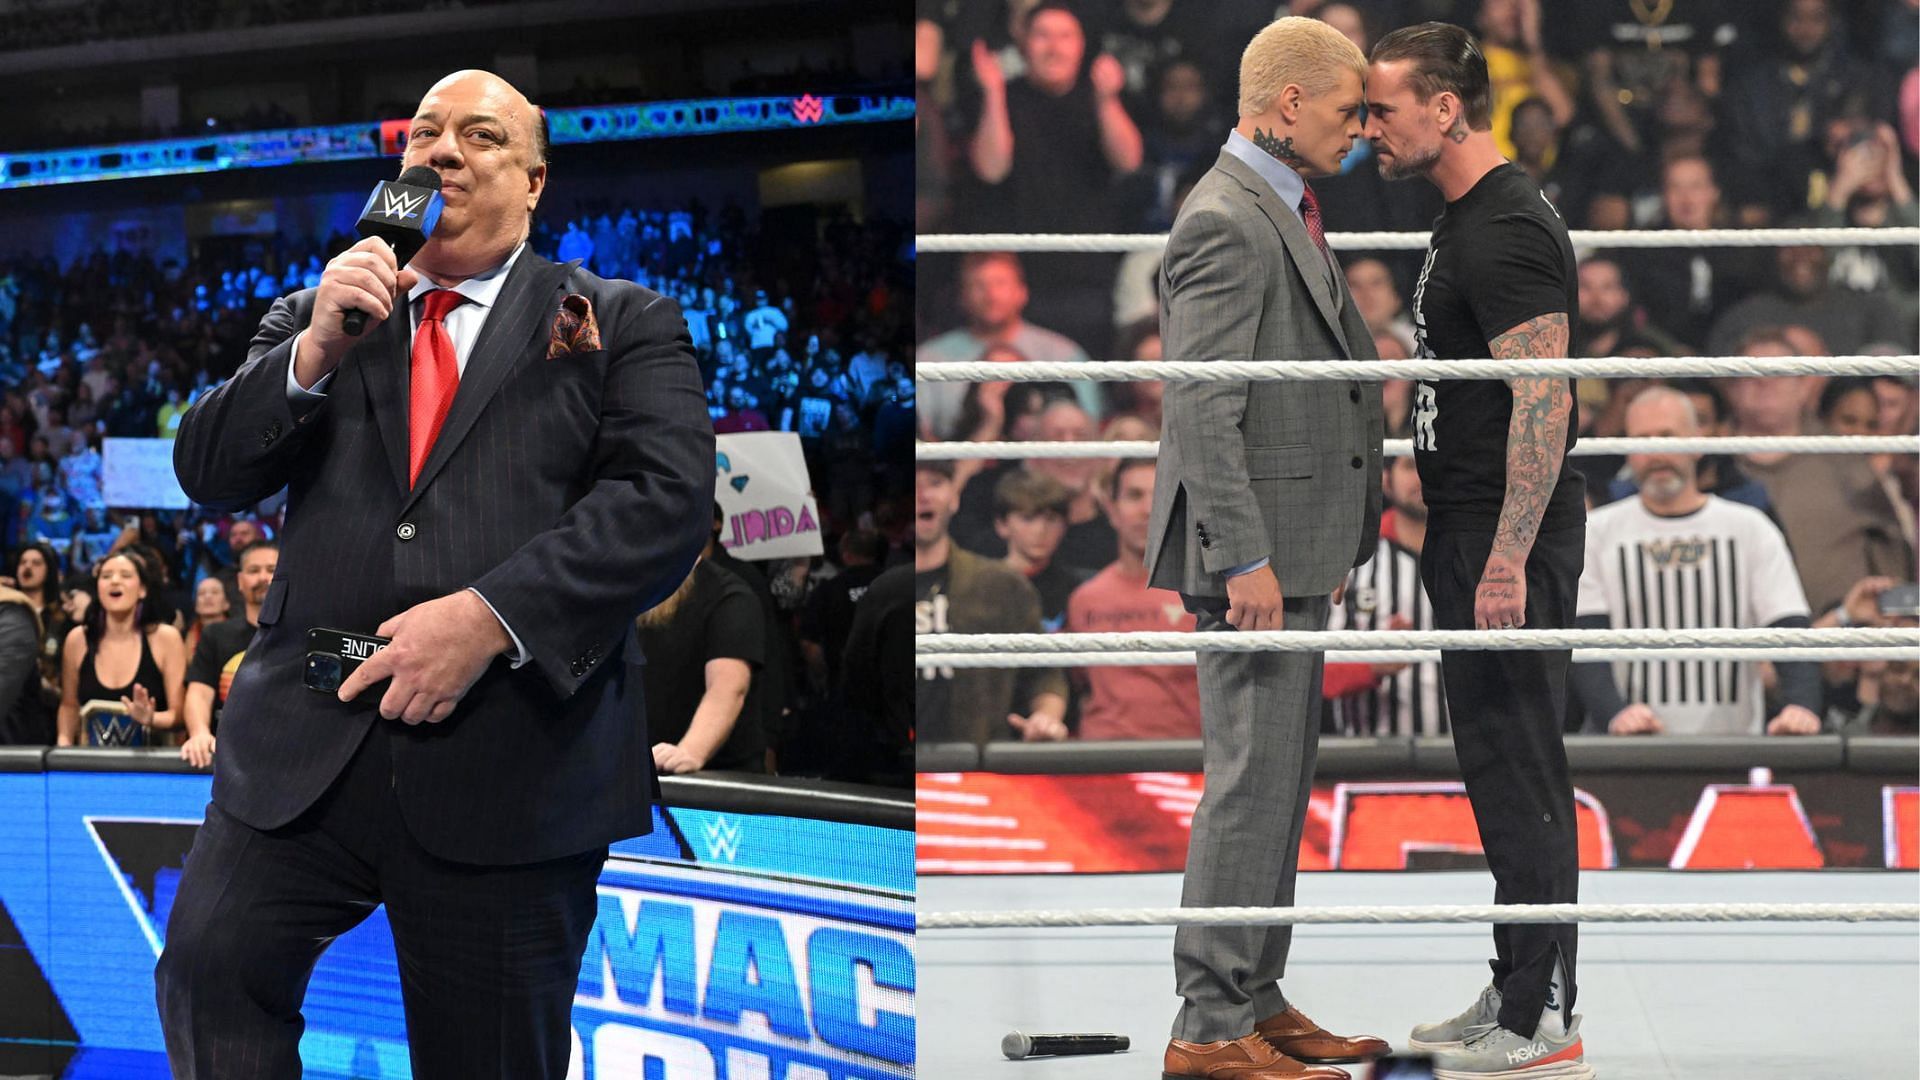 Paul Heyman, CM Punk, and Cody Rhodes in picture